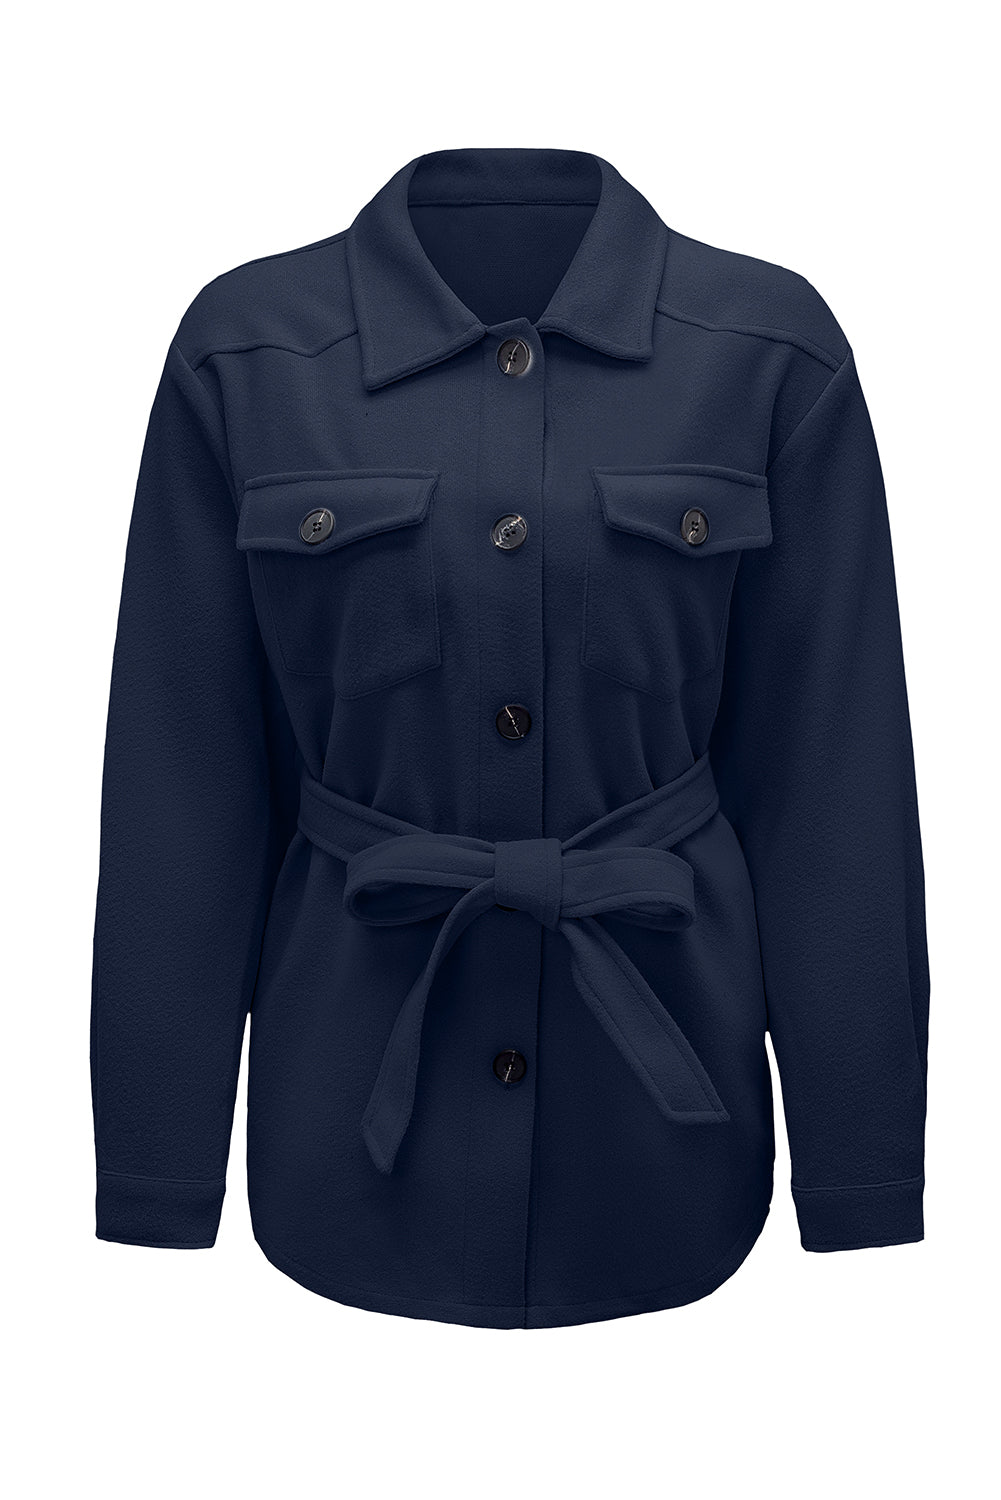 Blue Women's Lapel Button Down Coat Winter Belted Coat with Pockets LC8511359-5